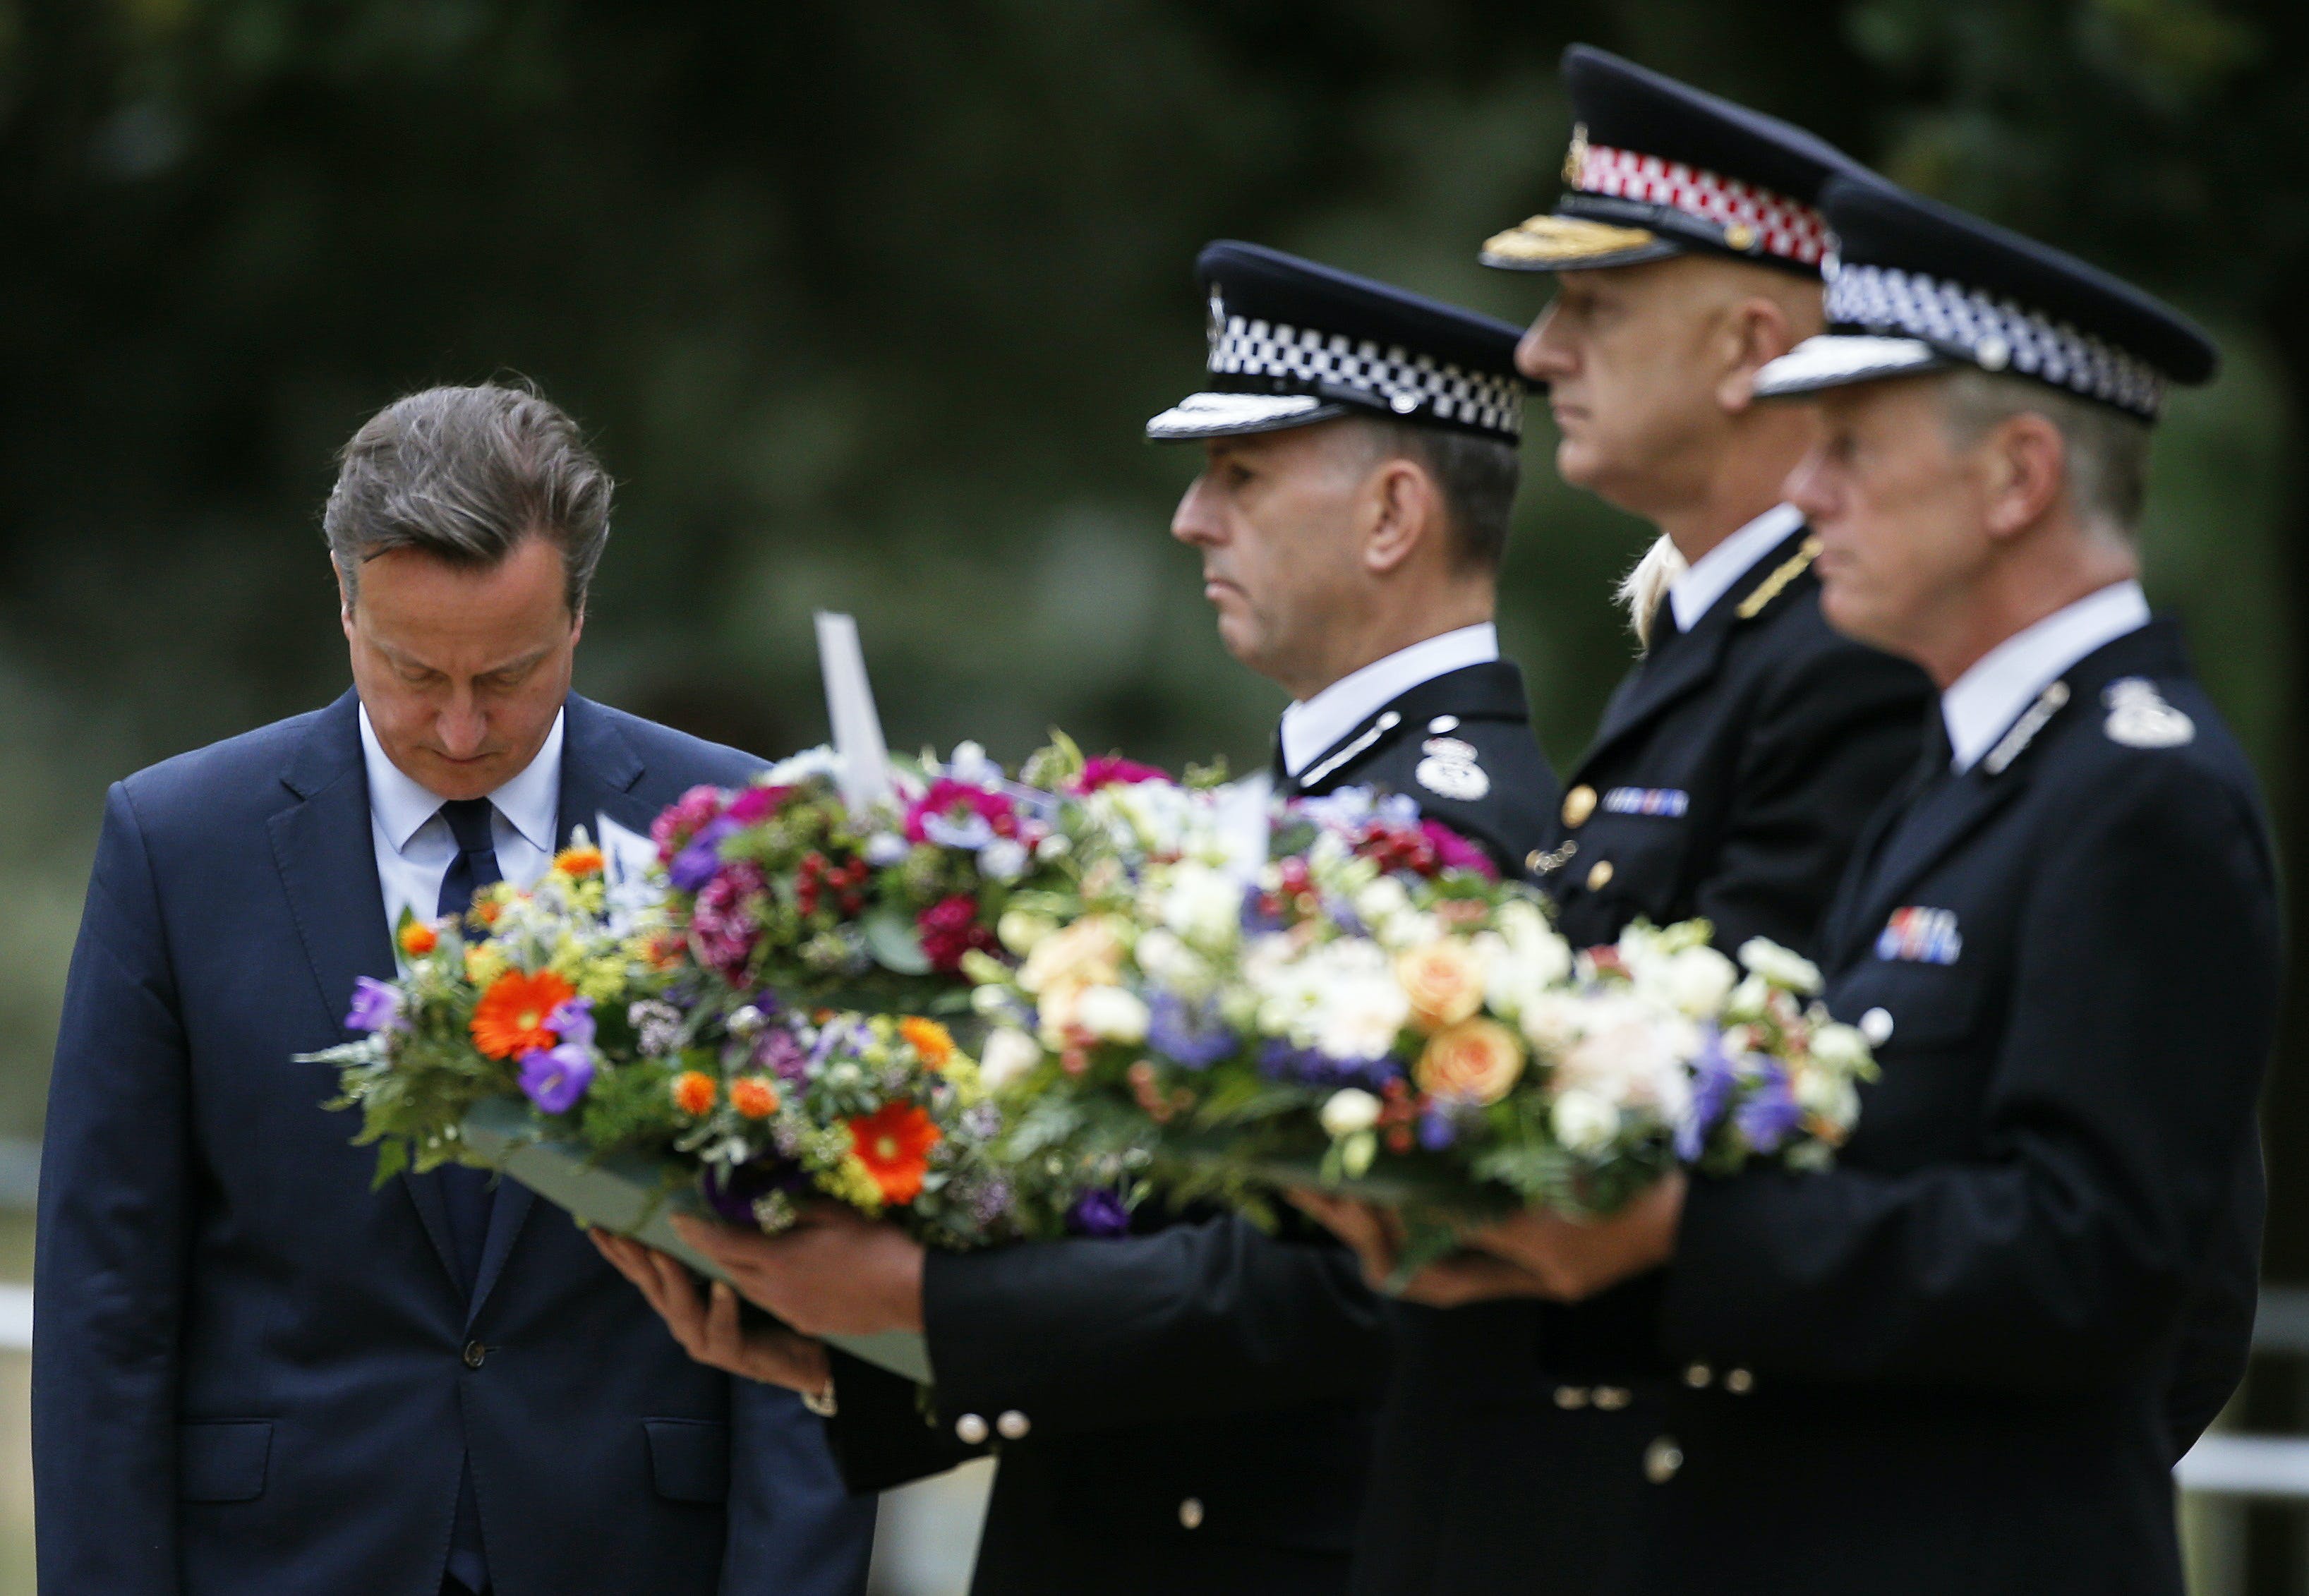 Britain's Prime Minister David Cameron bows as he stands with police officers after laying a wreath at the memorial to victims of the July 7, 2005 London bombings